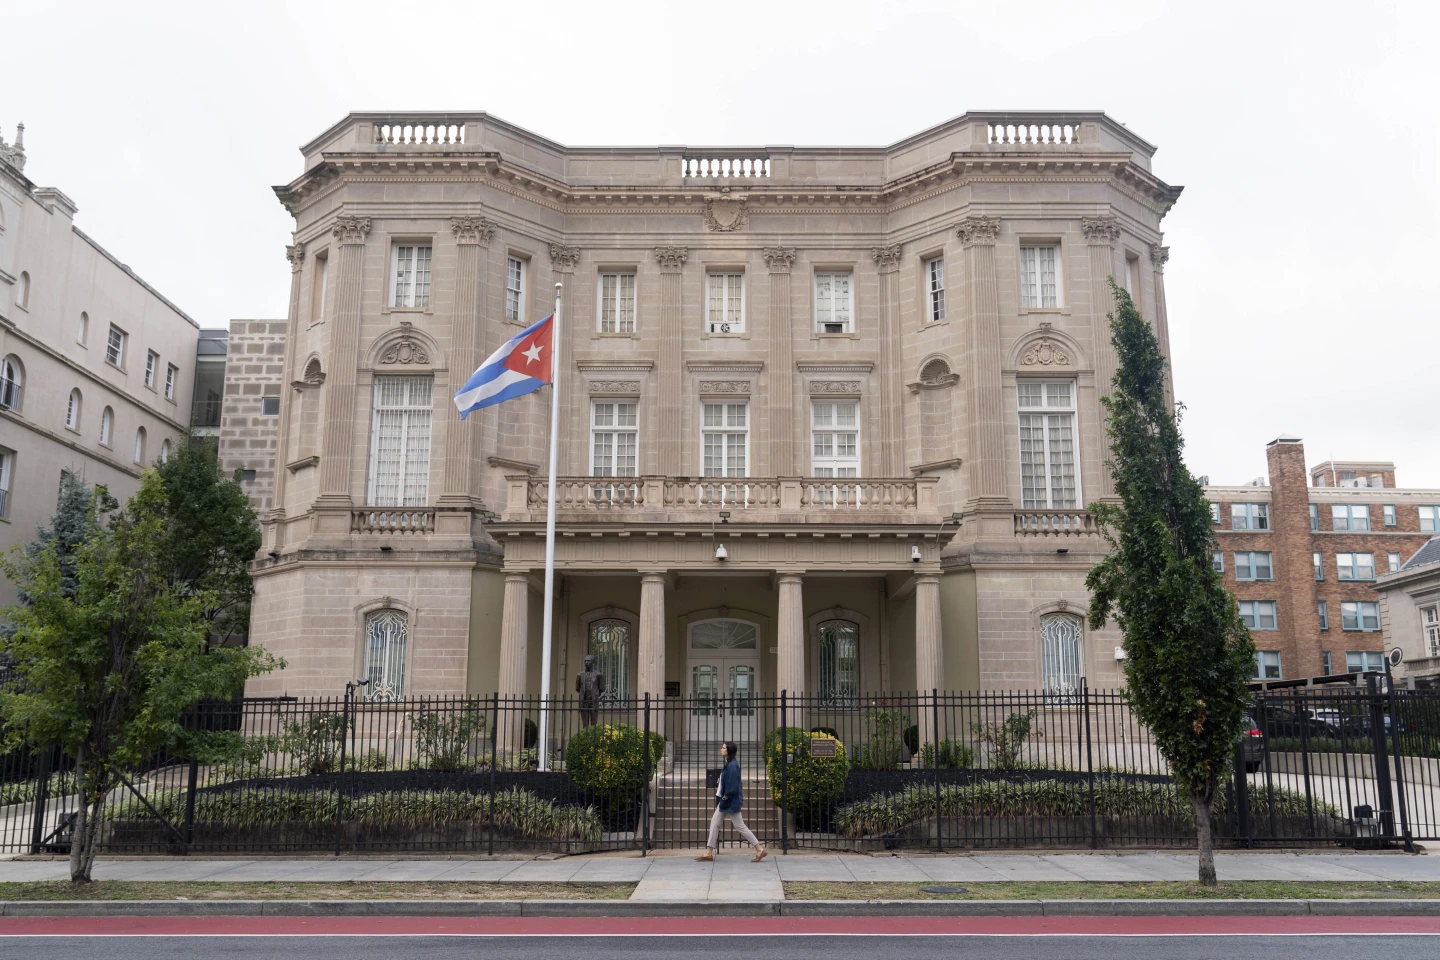 A Molotov Cocktail Is Thrown at the Cuban Embassy in Washington, but There’s No Significant Damage